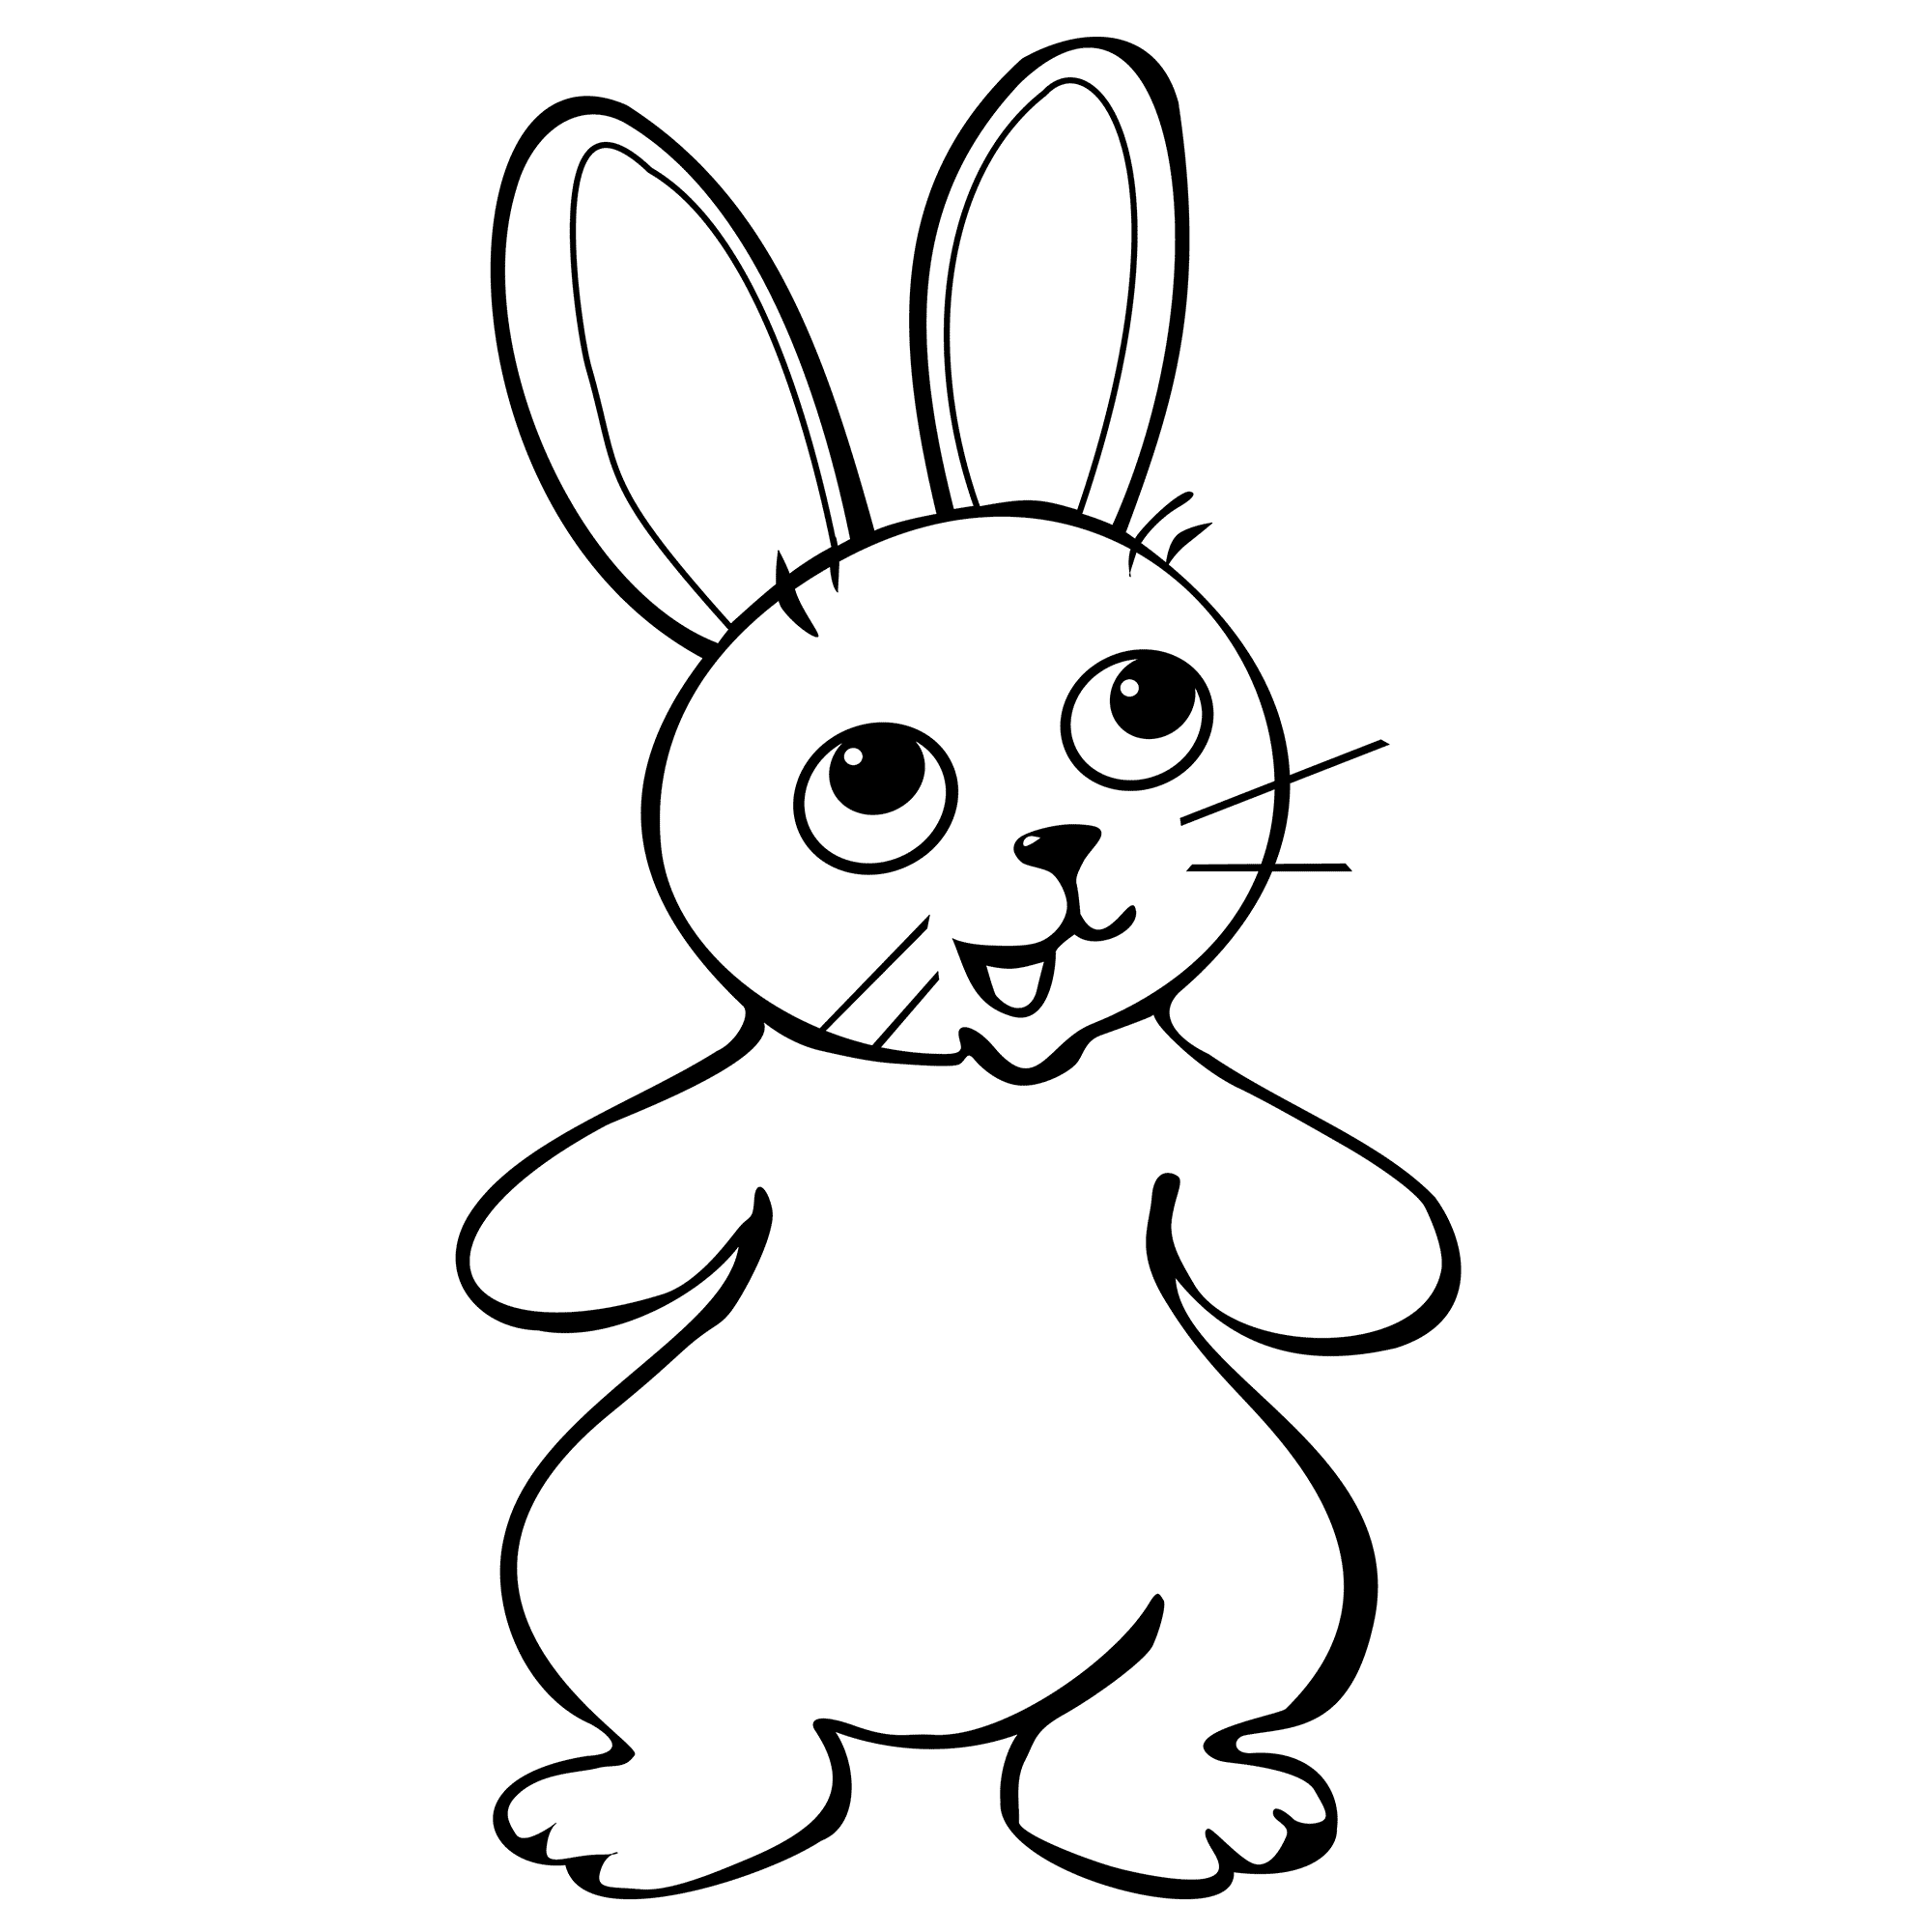 bunny rabbit pictures to color bunny coloring pages best coloring pages for kids to color pictures bunny rabbit 